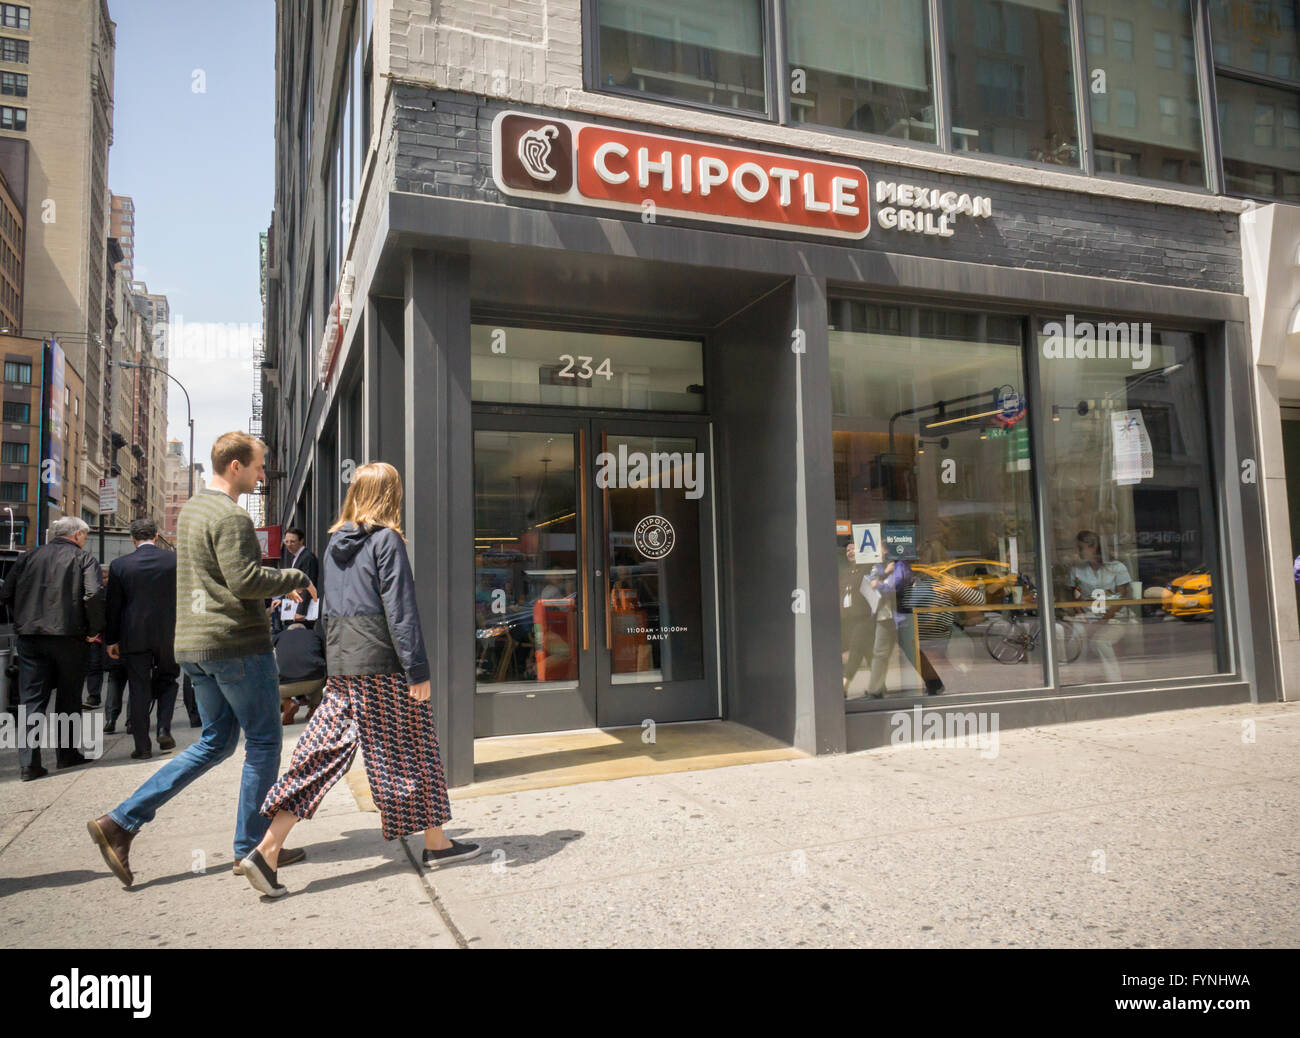 A Chipotle Mexican Grill restaurant in New York on Tuesday, April 26, 2016.  Both Chipotle and Panera Bread are expected to report their first-quarter  earnings after the bell. Chipotle's norovirus and e.coli